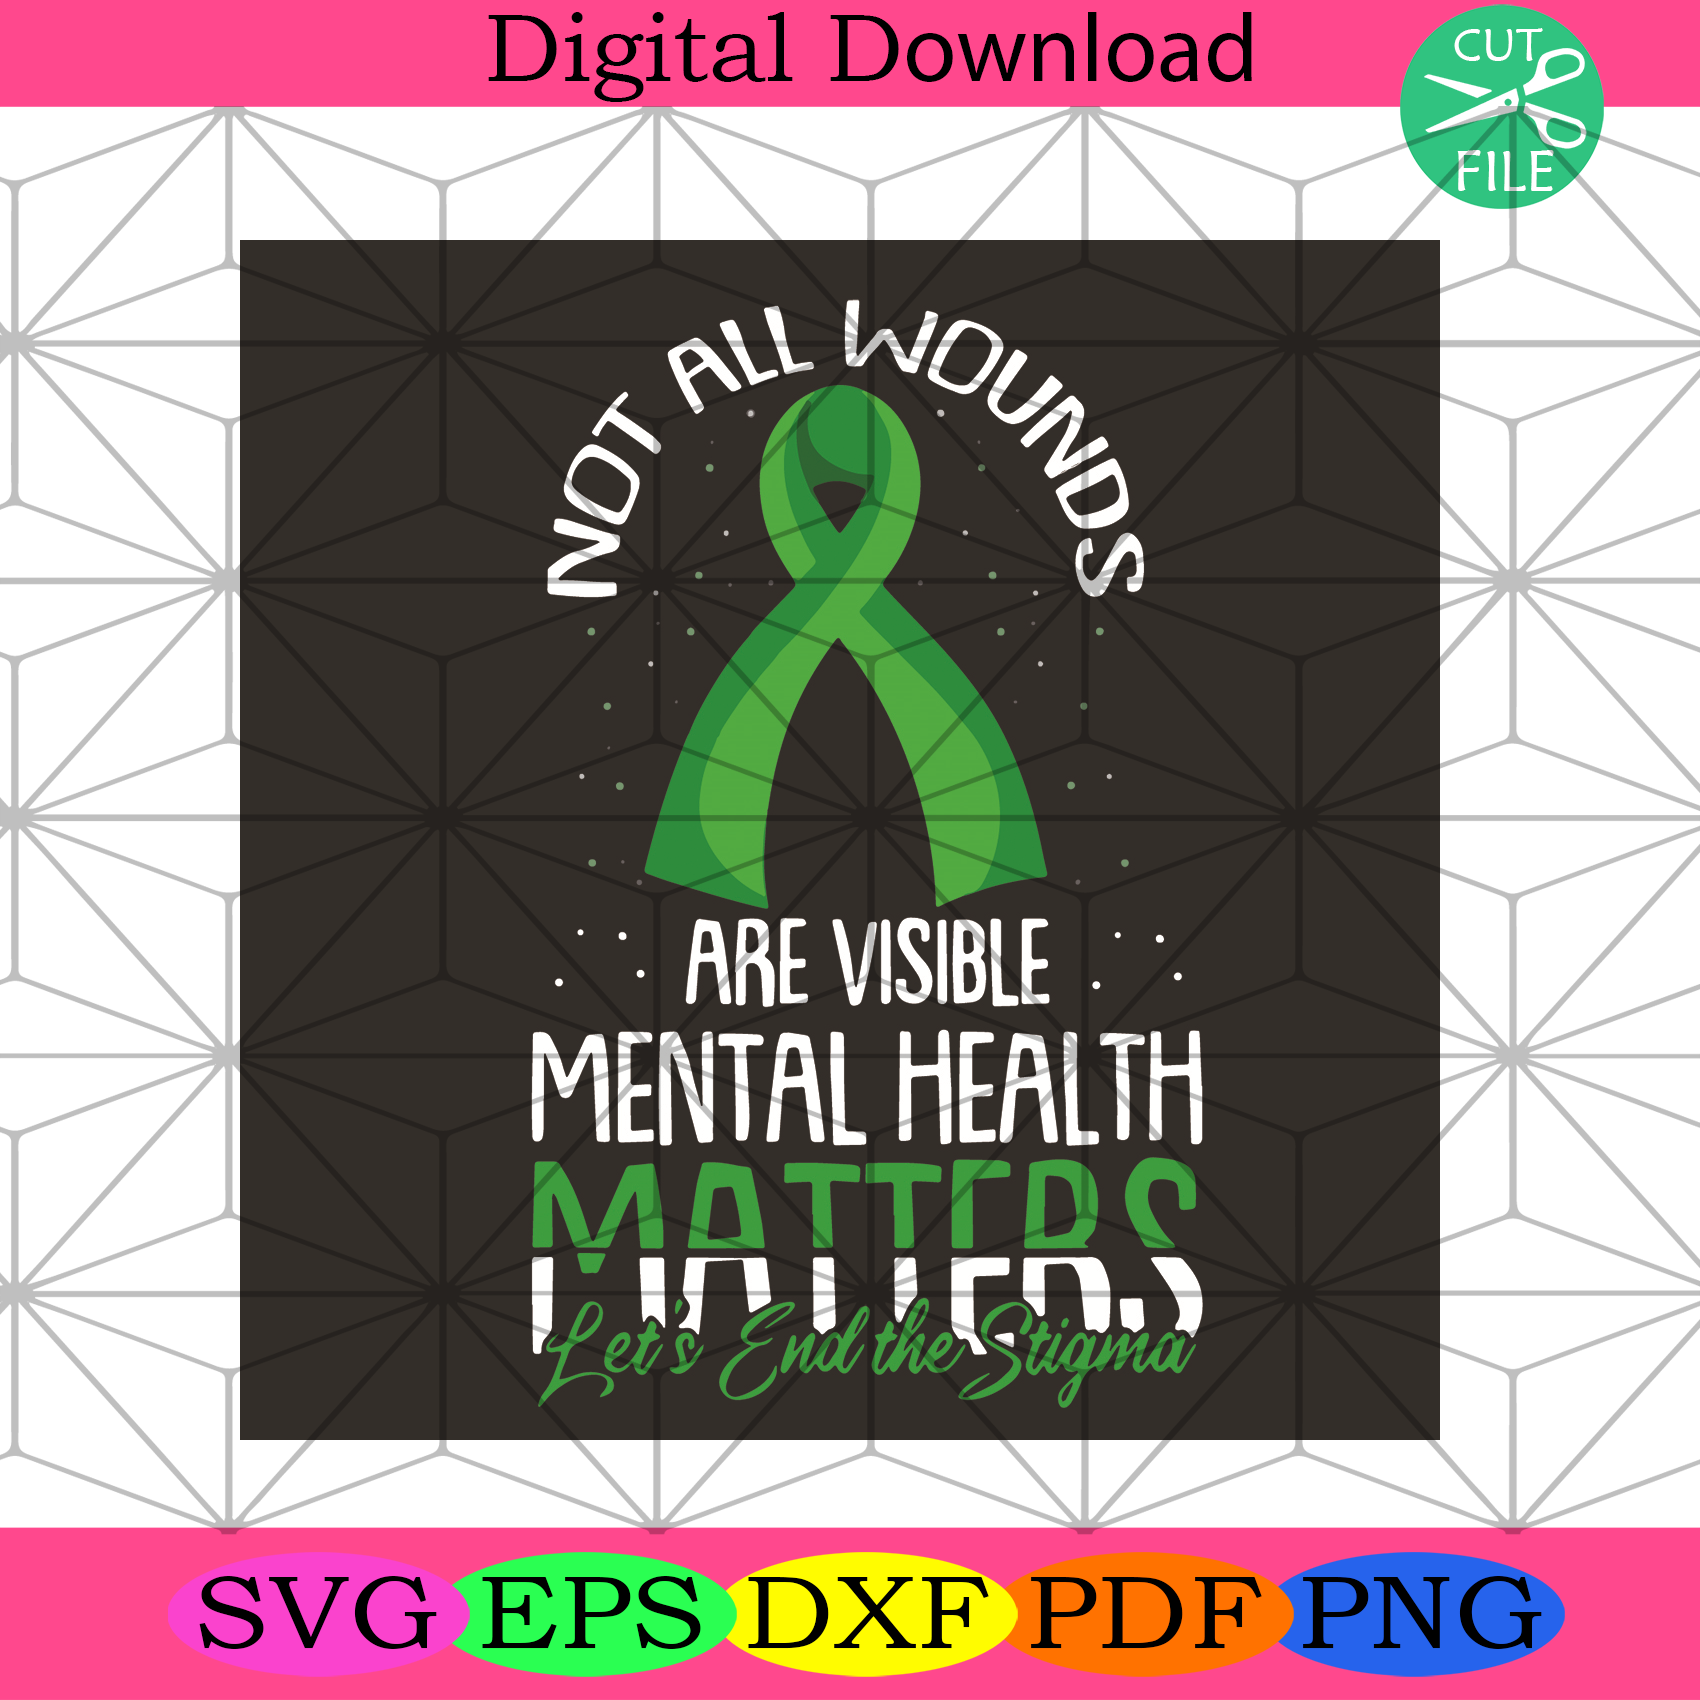 Not All Wounds Are Visible Mental Health Matters Svg Trending Svg